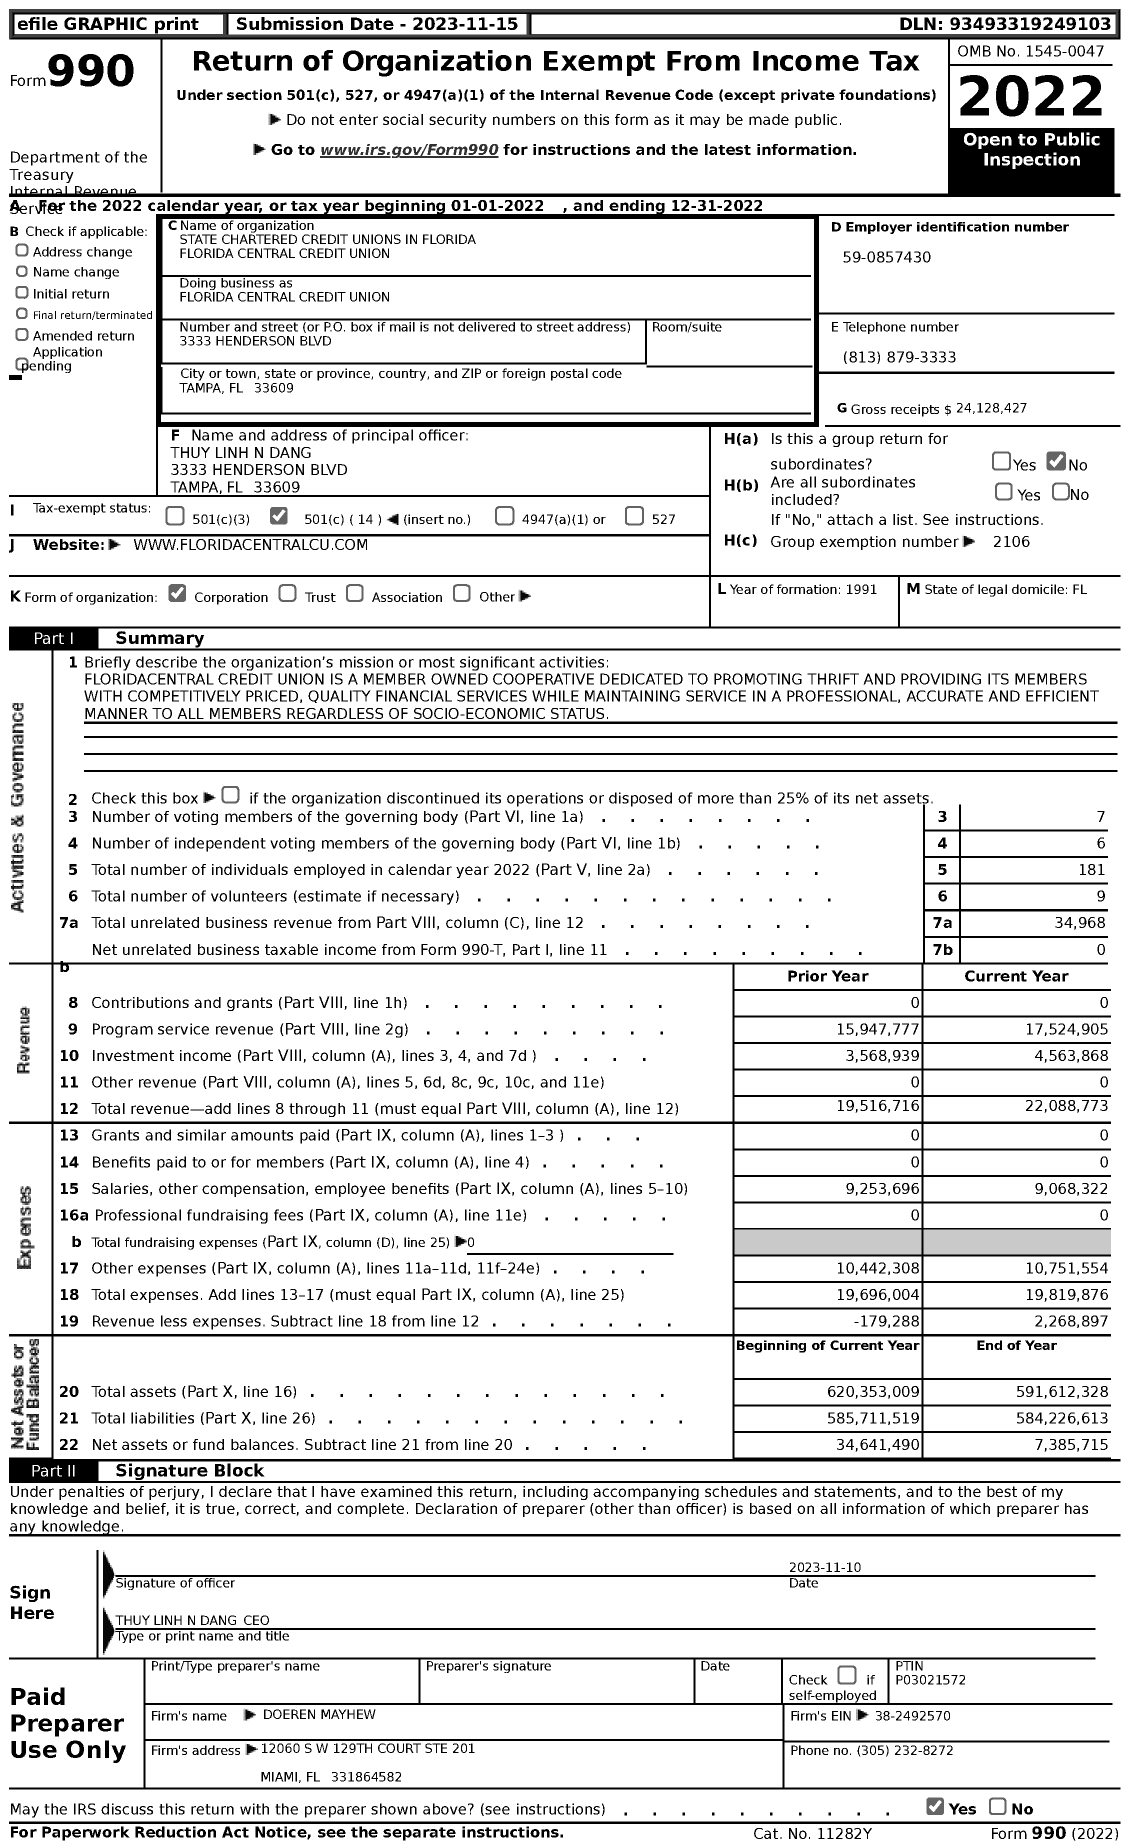 Image of first page of 2022 Form 990 for State Chartered Credit Unions in Florida Florida Central Credit Union